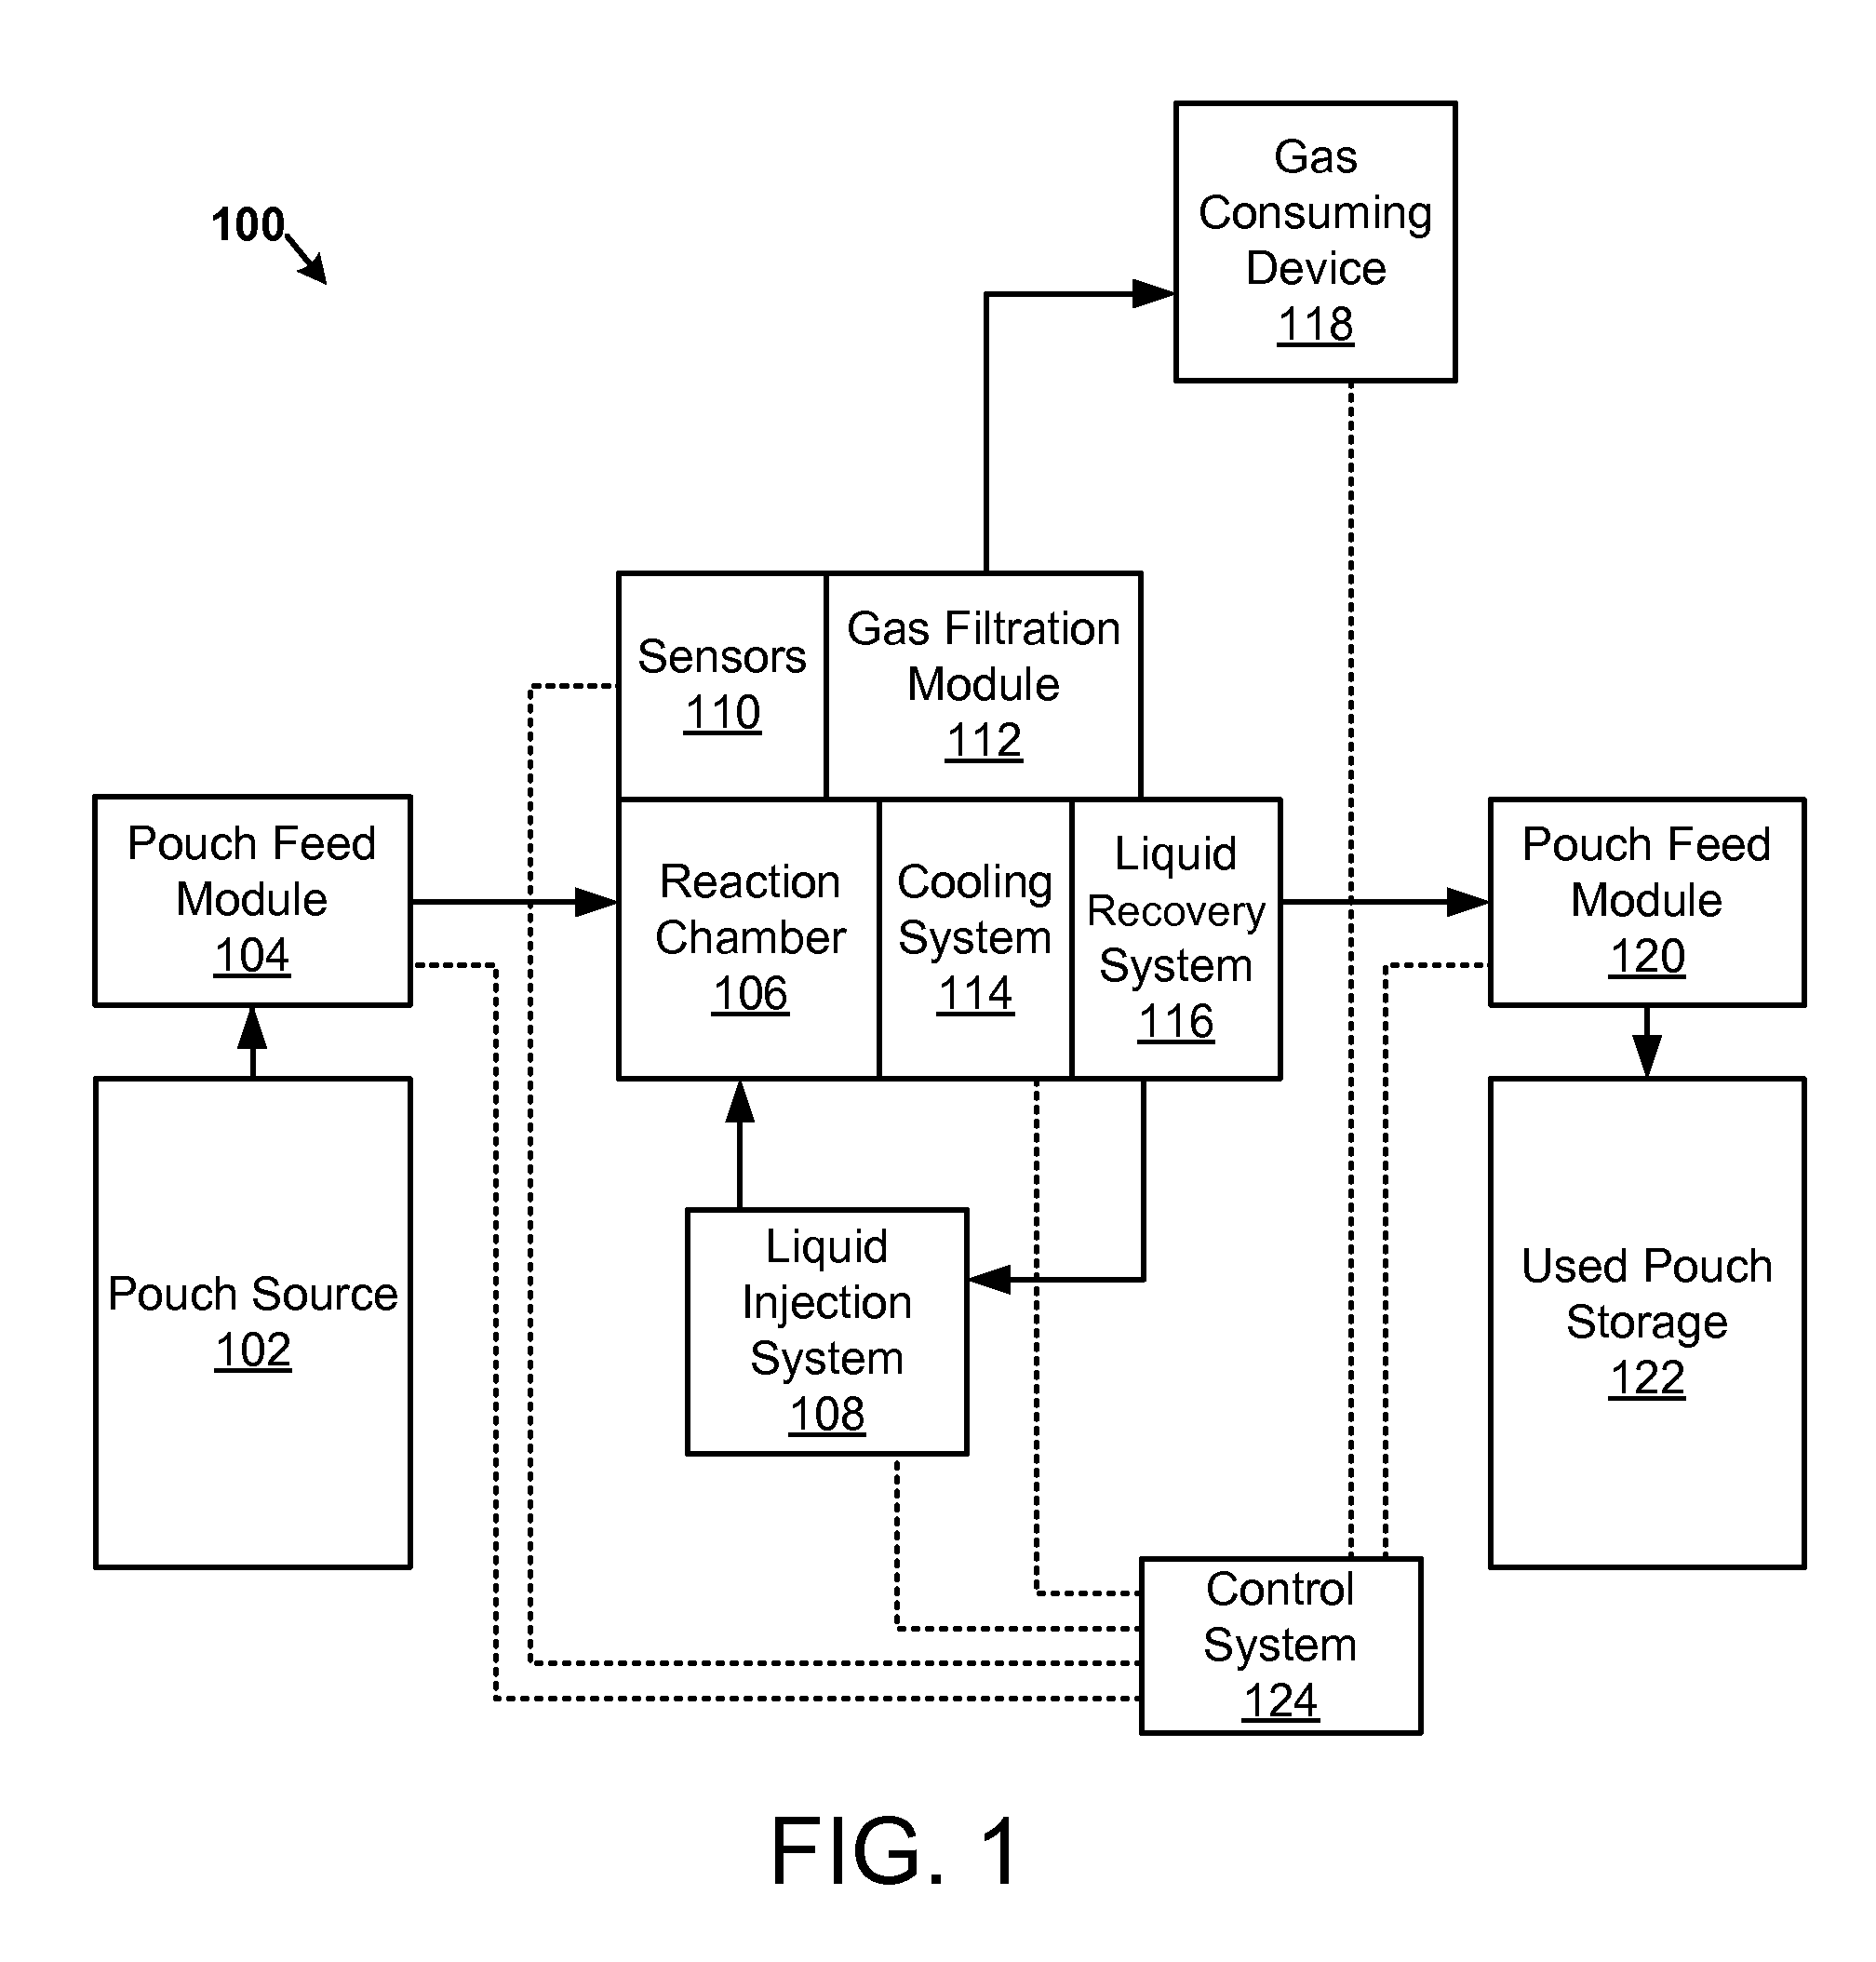 Apparatus, system, and method for generating a gas from solid reactant pouches